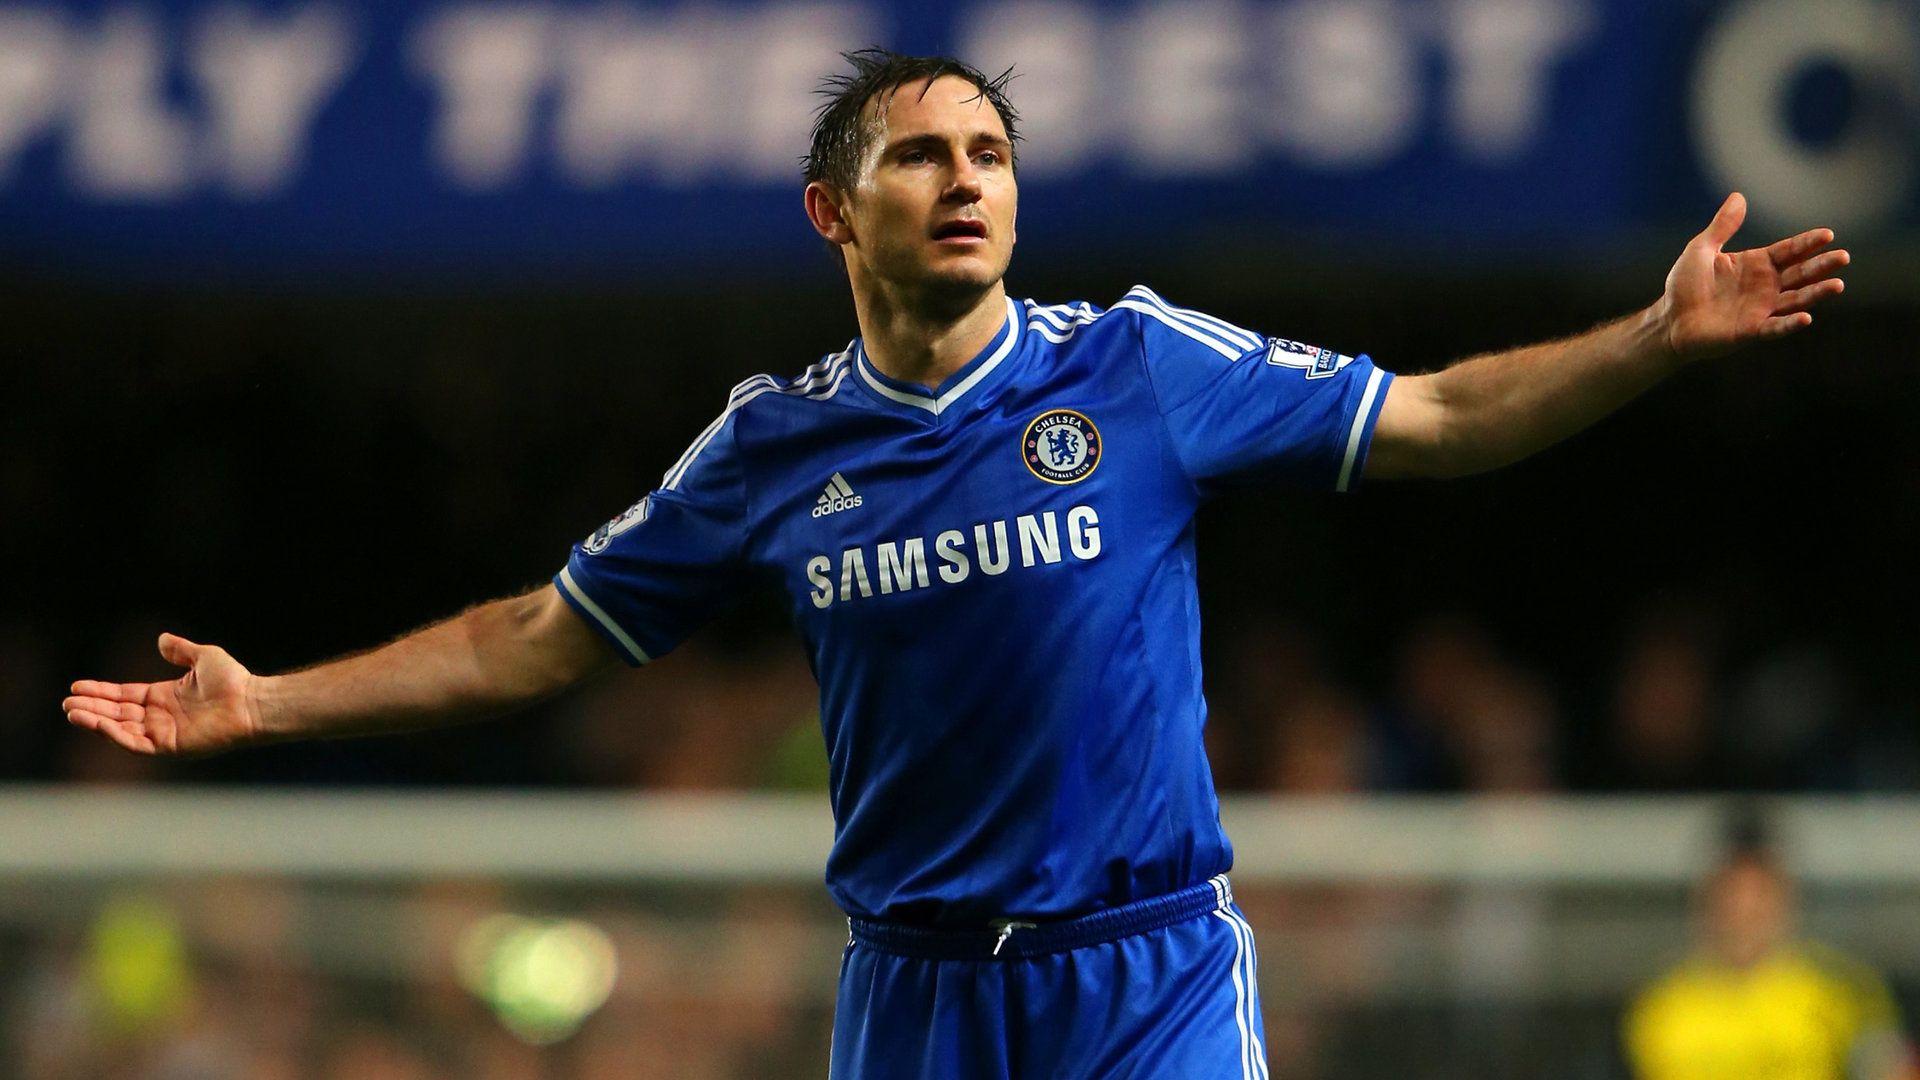 Chelsea Frank Lampard Wallpapers: Players, Teams, Leagues Wallpapers